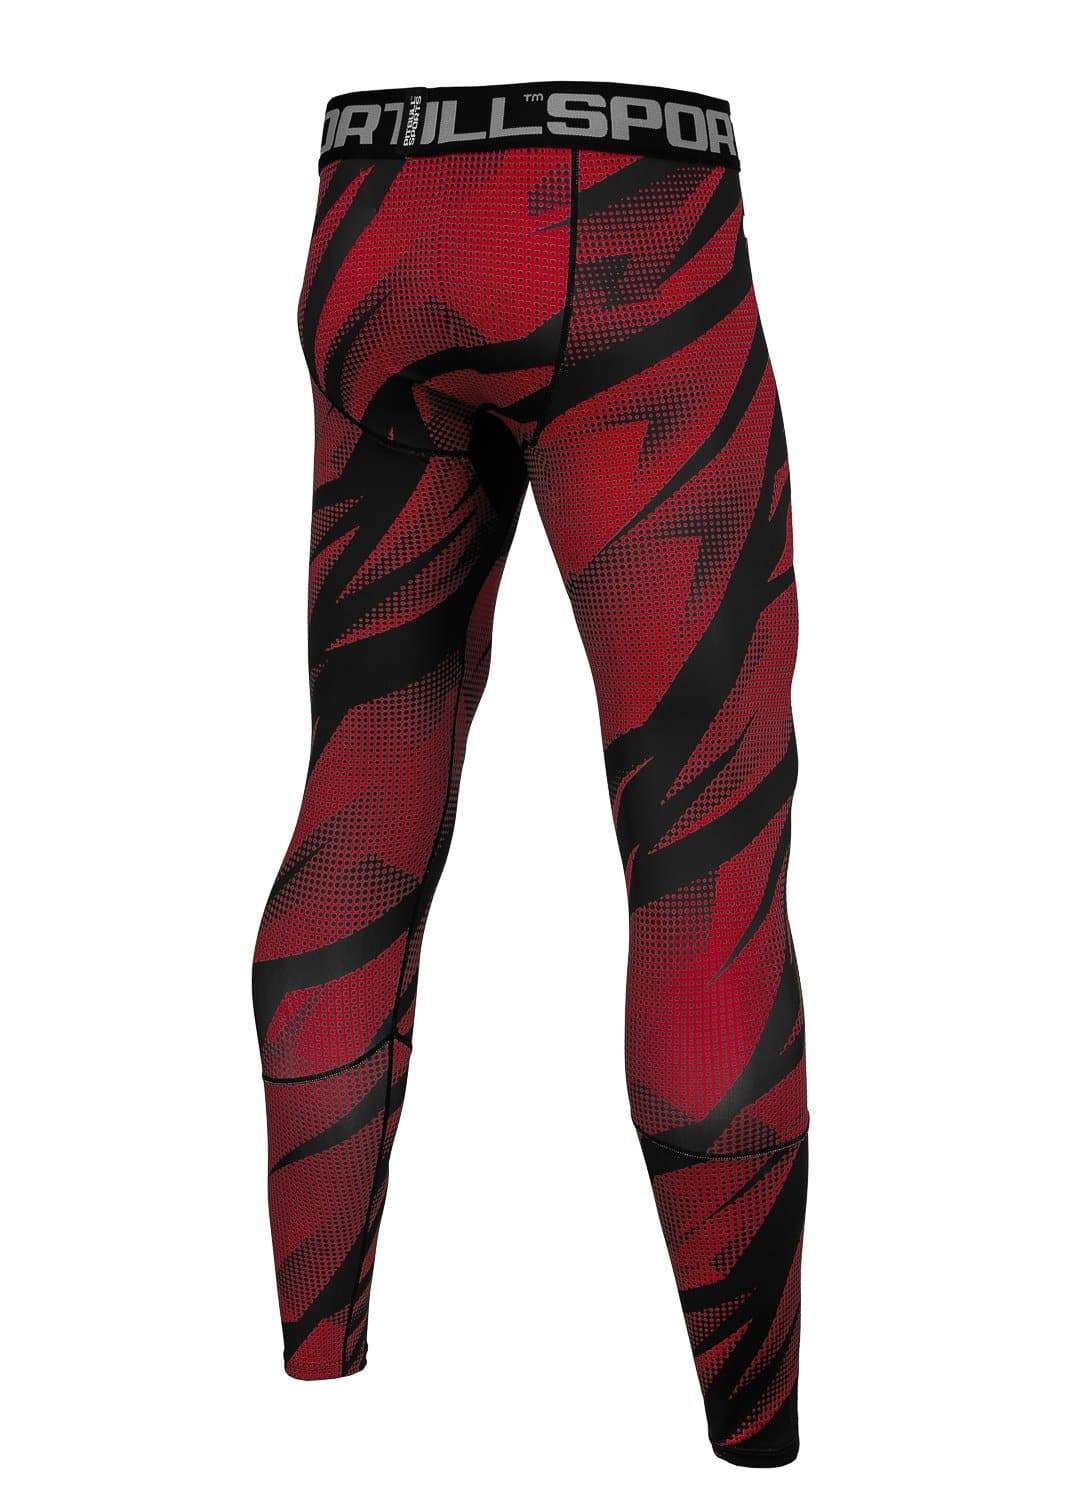 Buy DOT CAMO Red Compression Pants